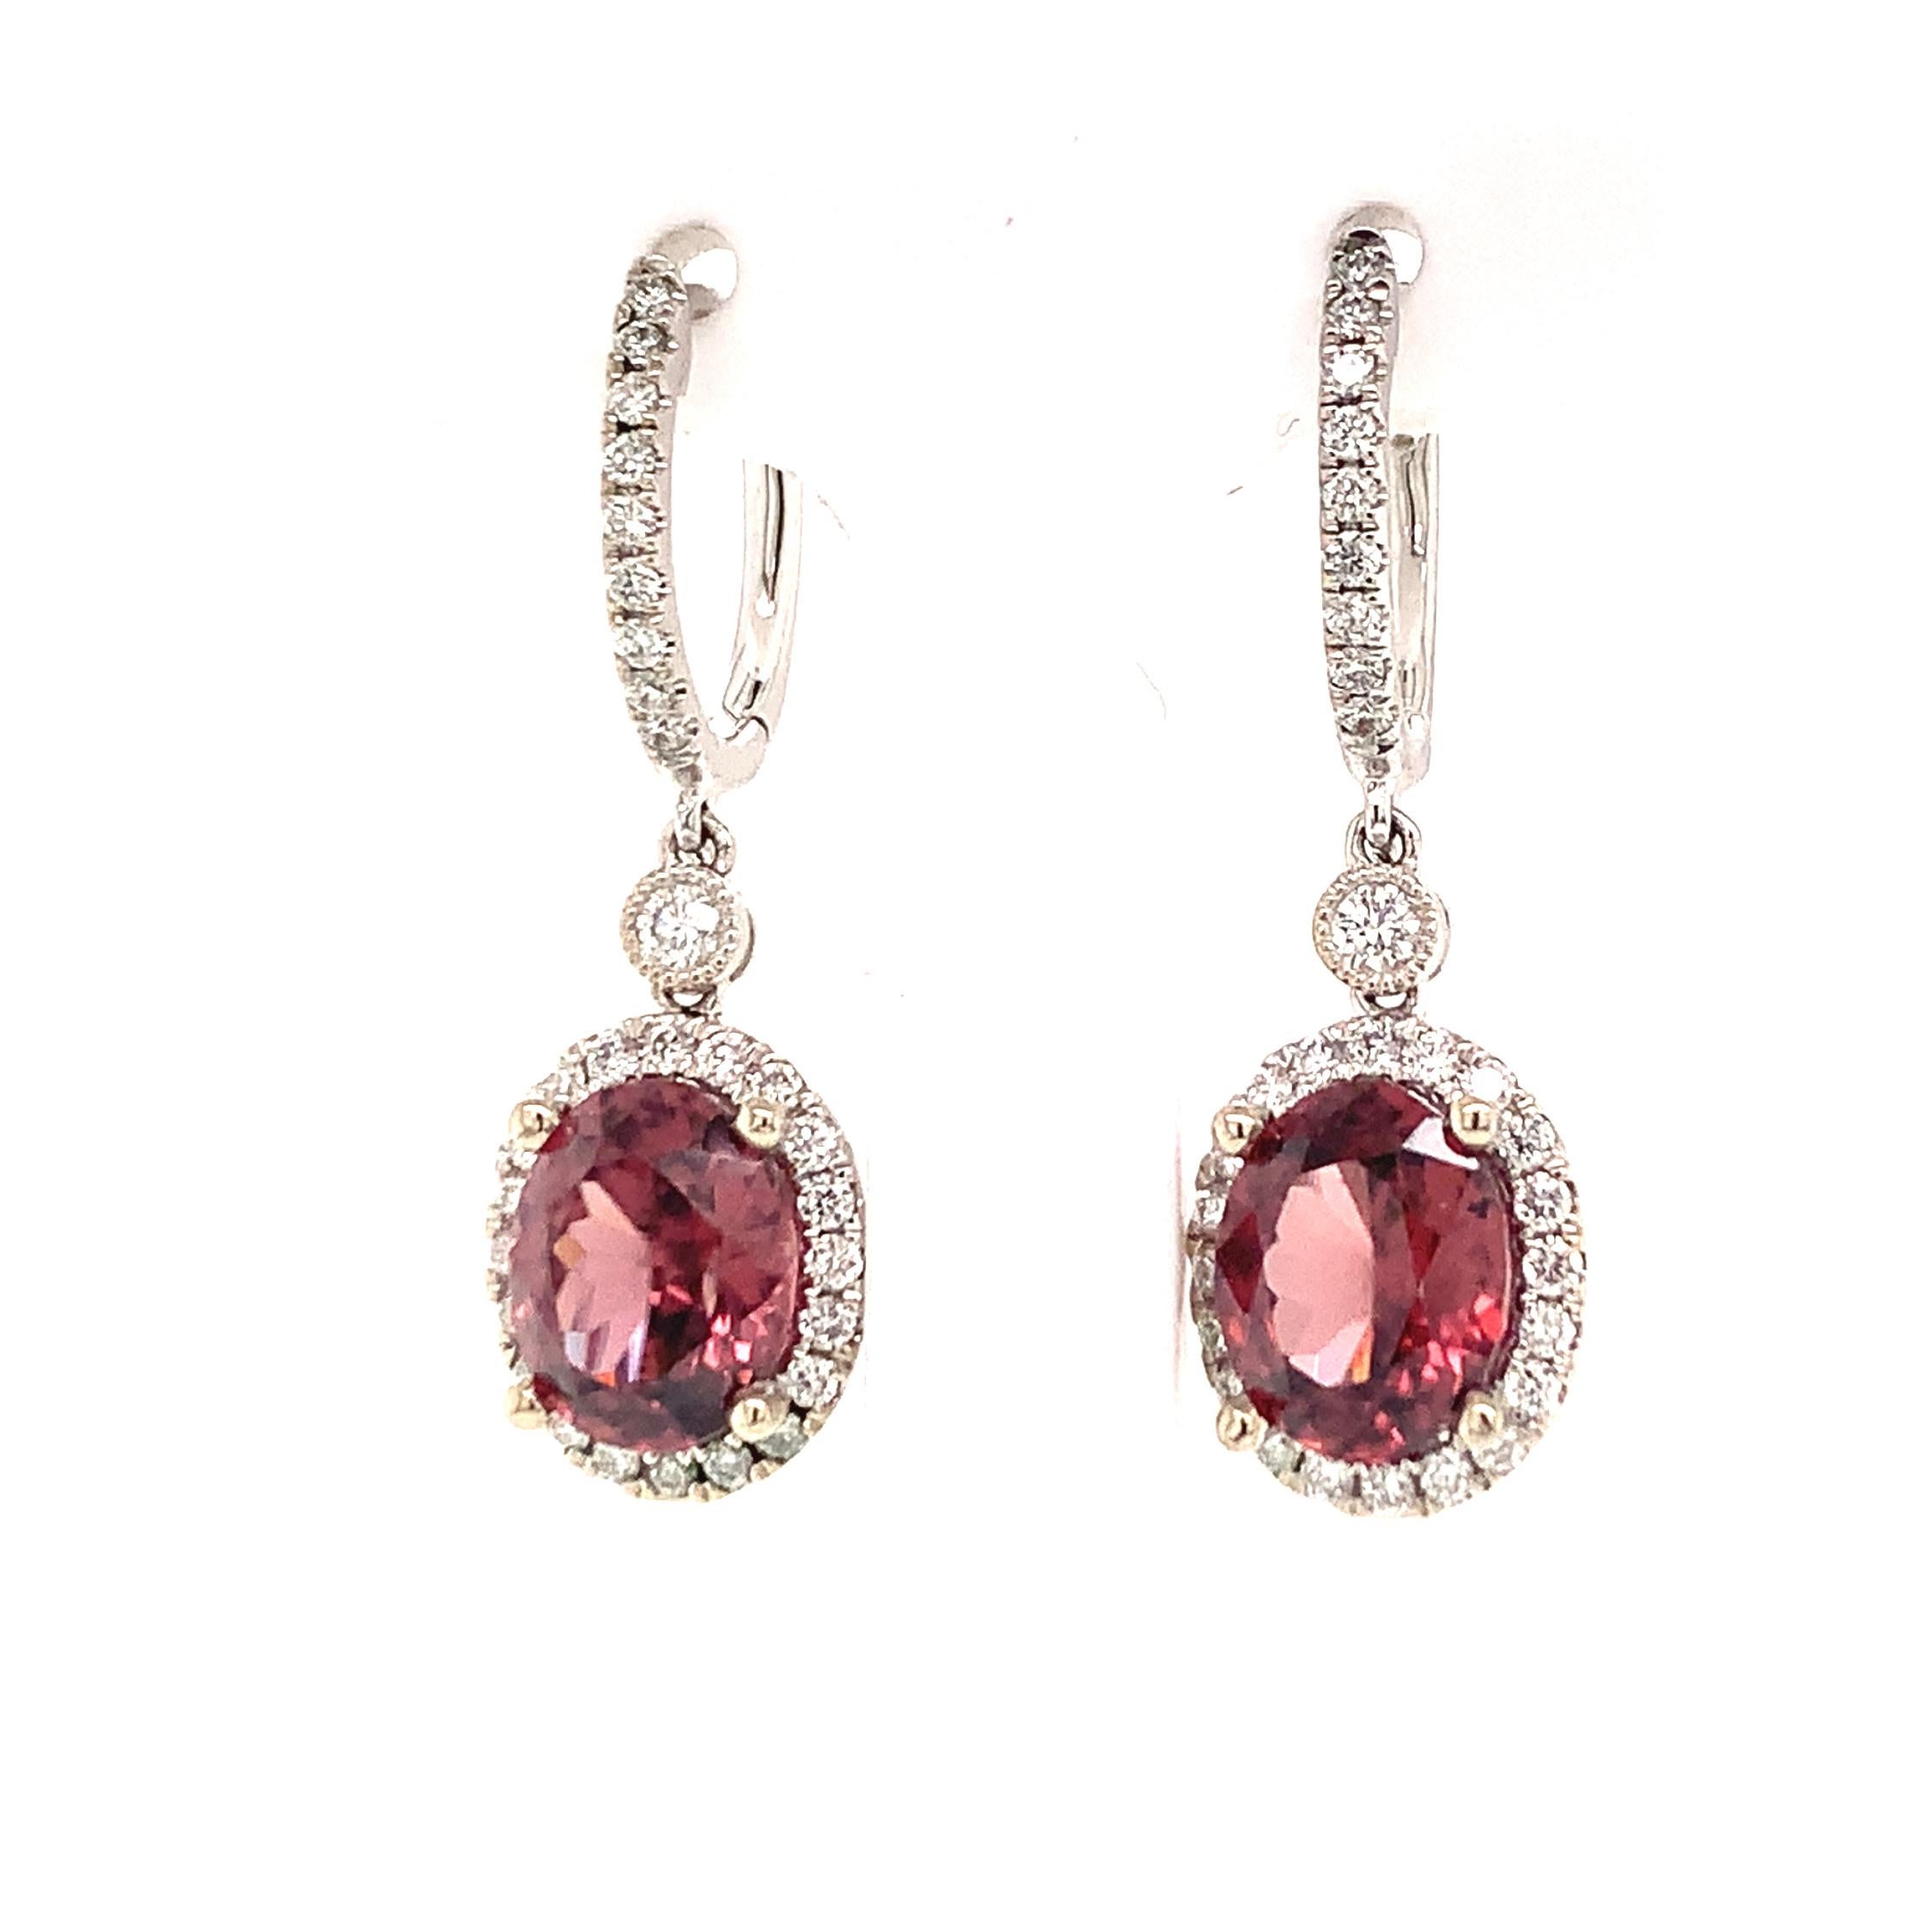 Natural Tourmaline Rubellite Diamond Earrings 18k Gold 6.62 TCW Certified For Sale 6